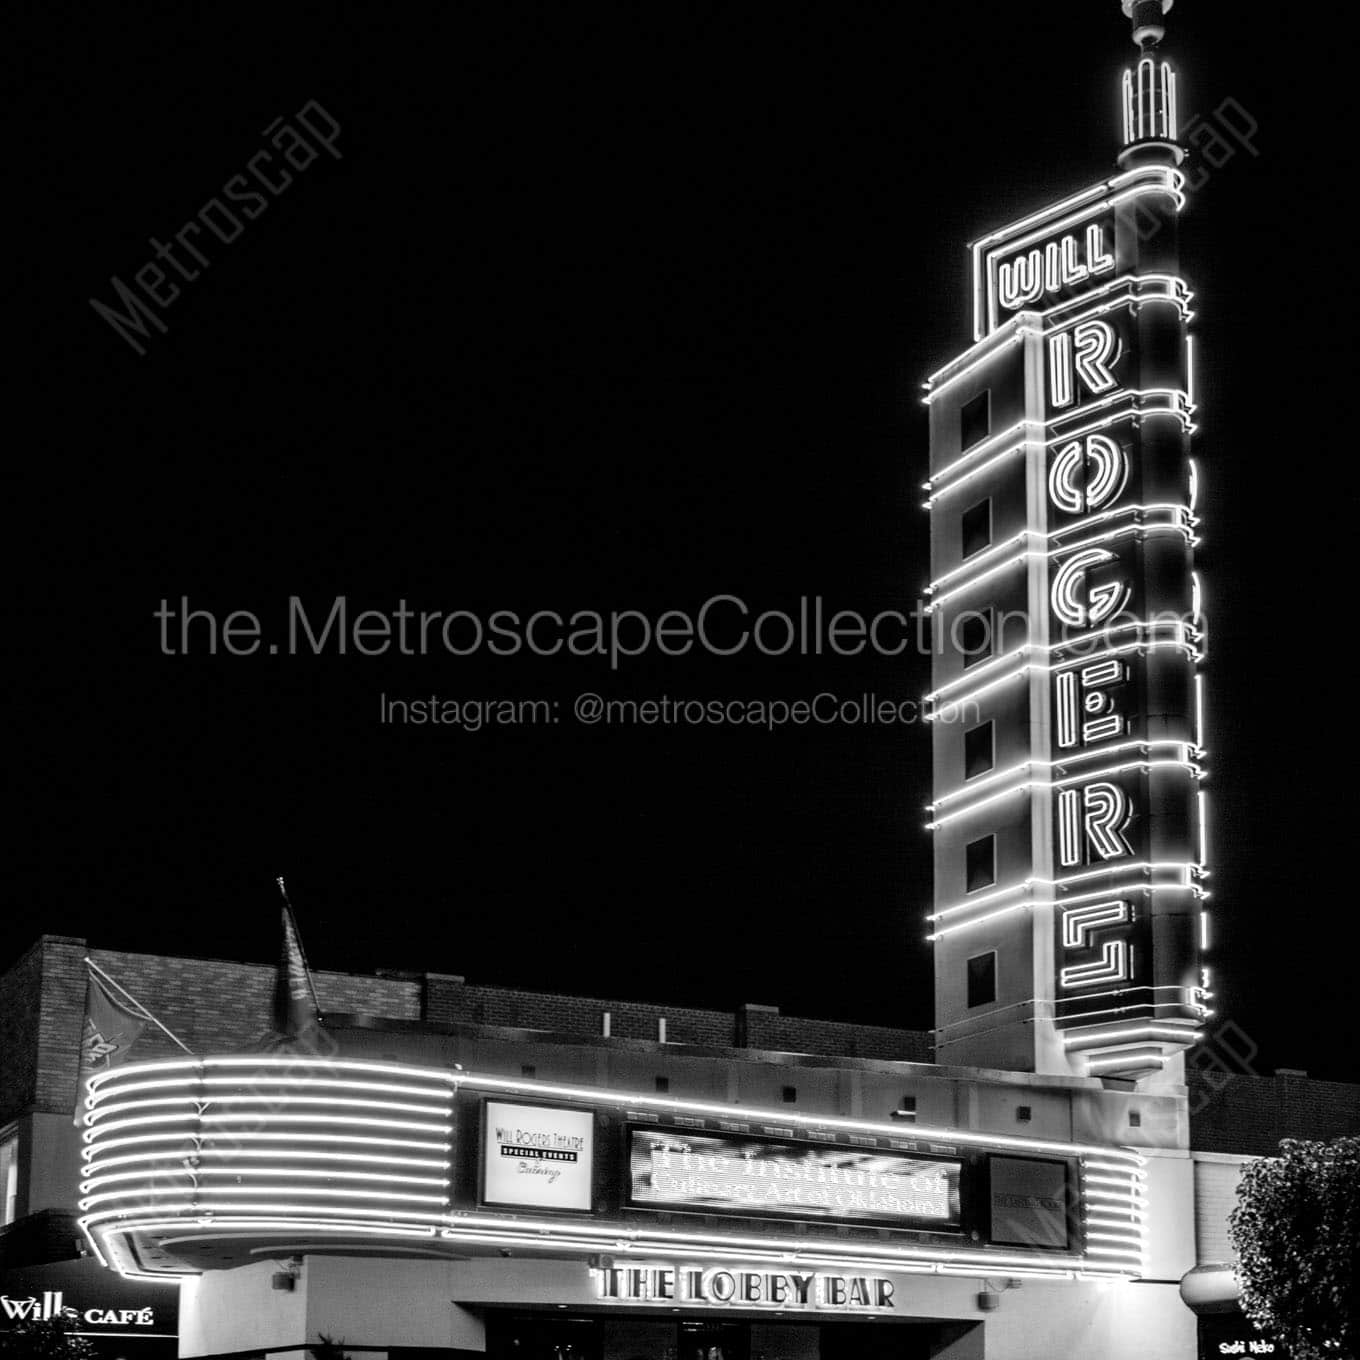 will rogers theater at night Black & White Office Art